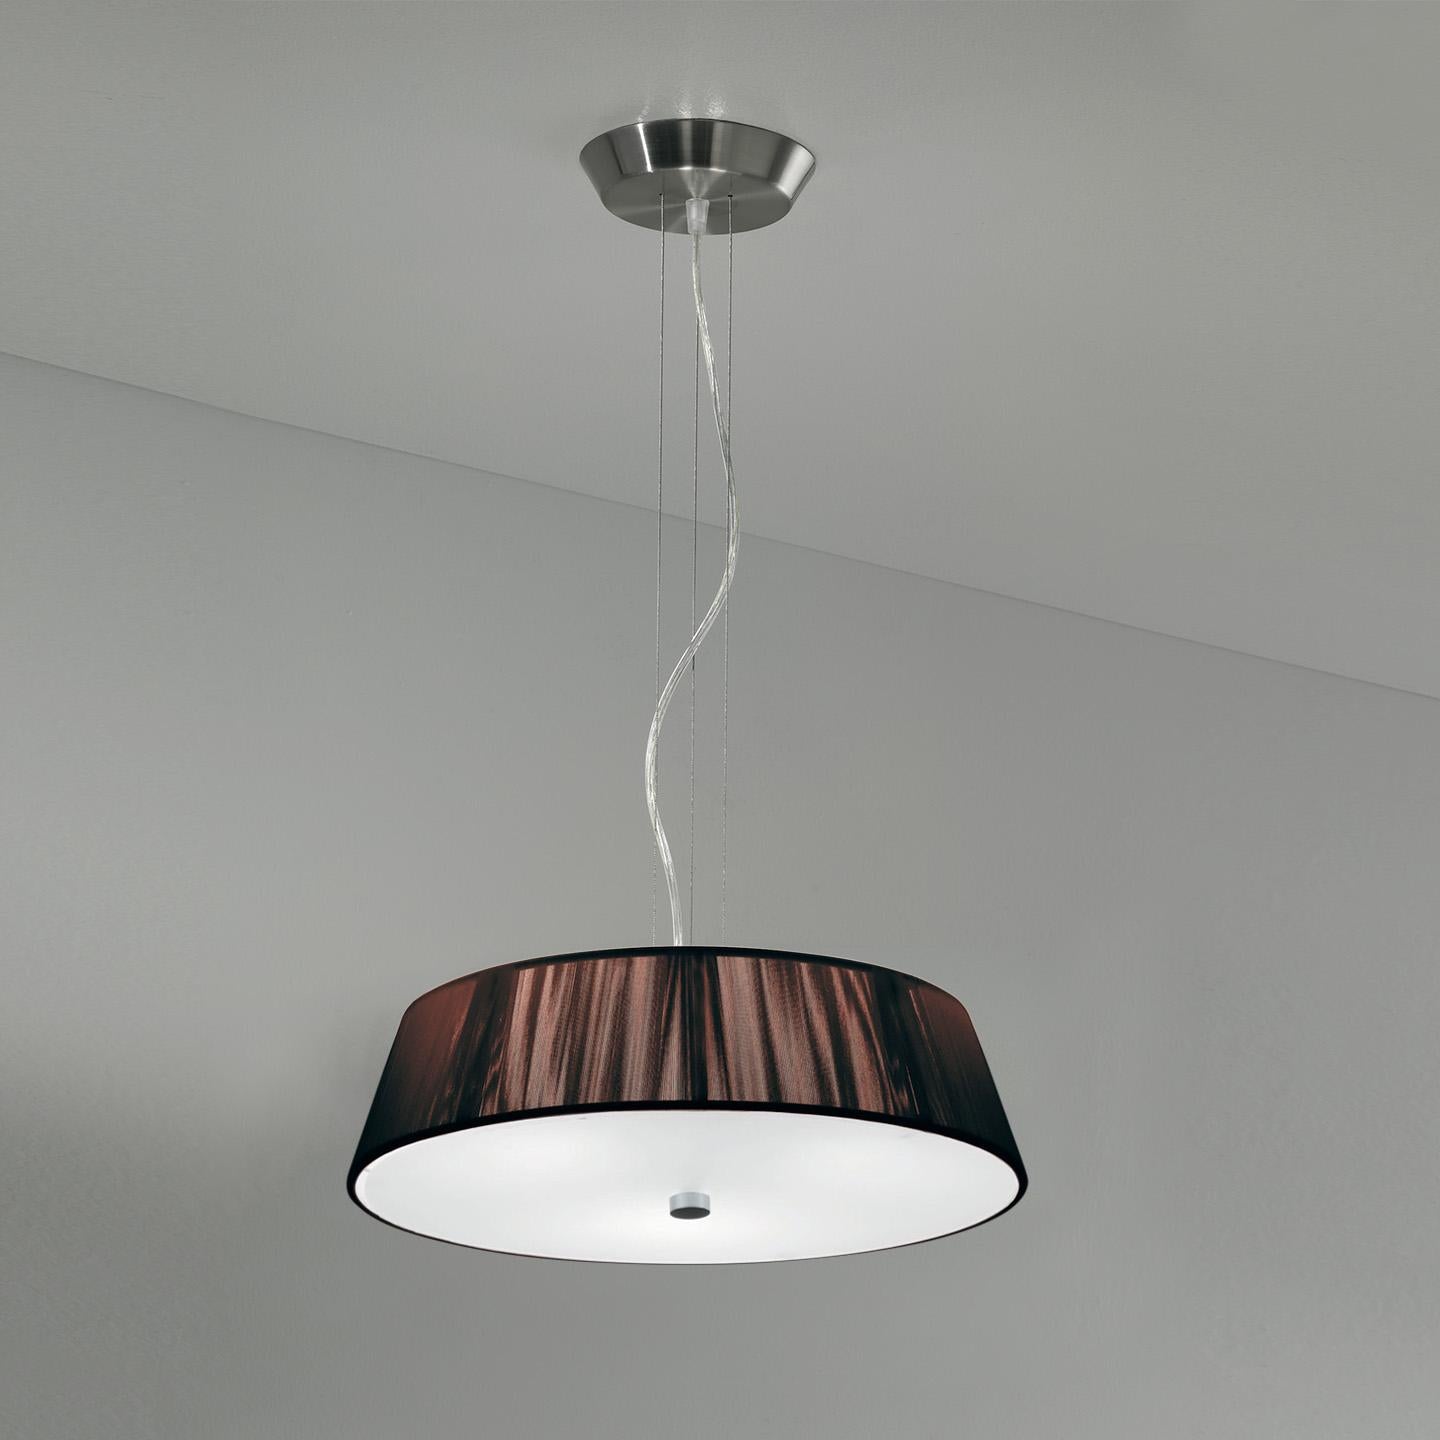 The Lilith Pendant is an elegant lighting solution with a stunning light effect created by threading thin string in a consistent pattern across the shade. As you engage it from different viewpoints, the light pattern shimmers and changes. The result